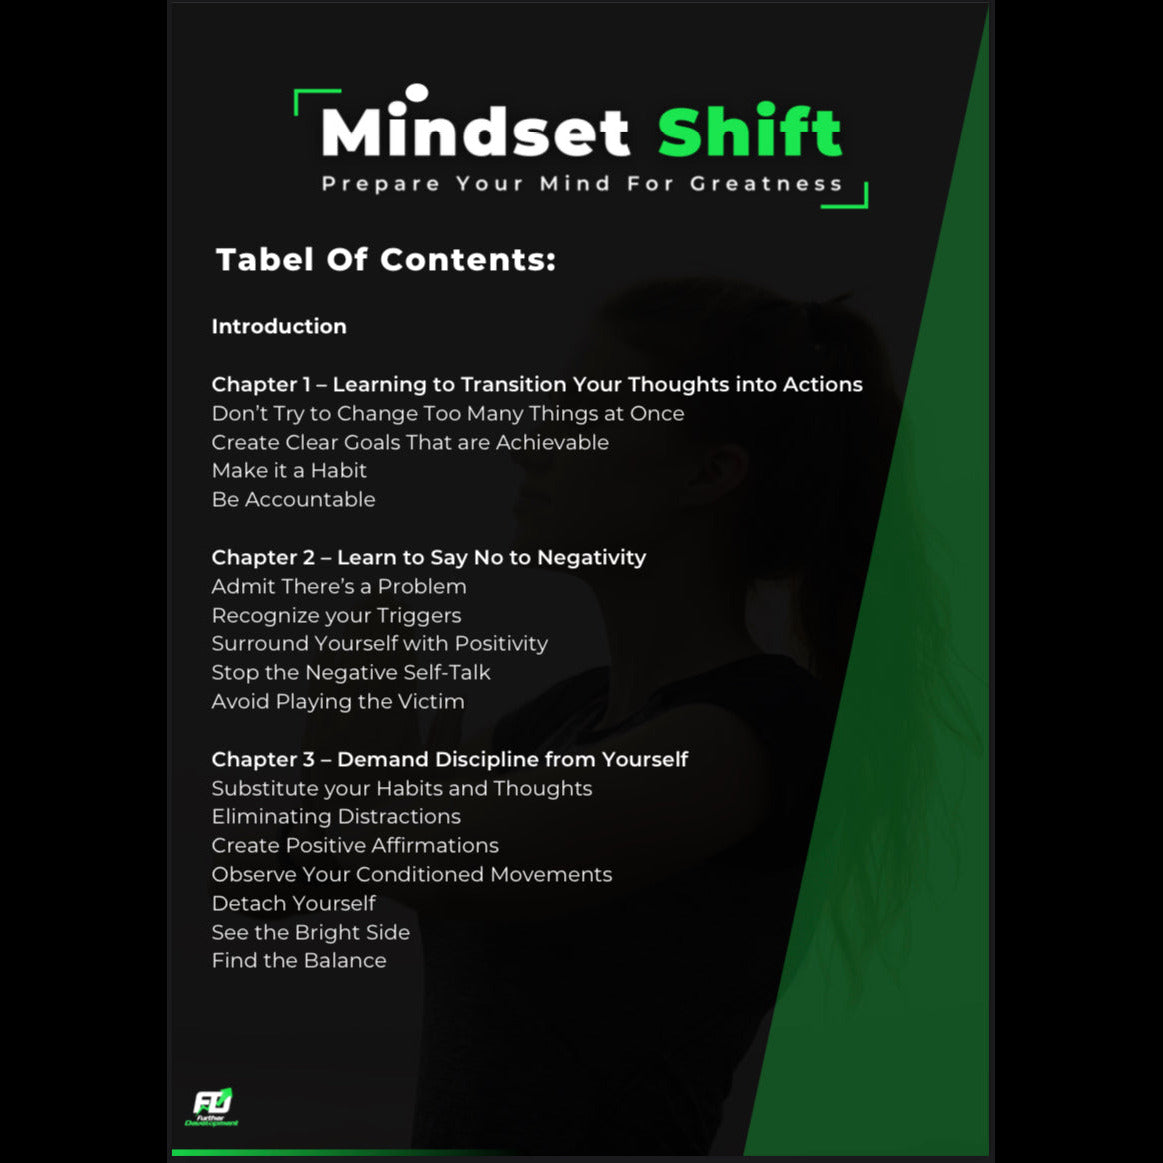 Mindset Shift - Prepare your mind for greatness